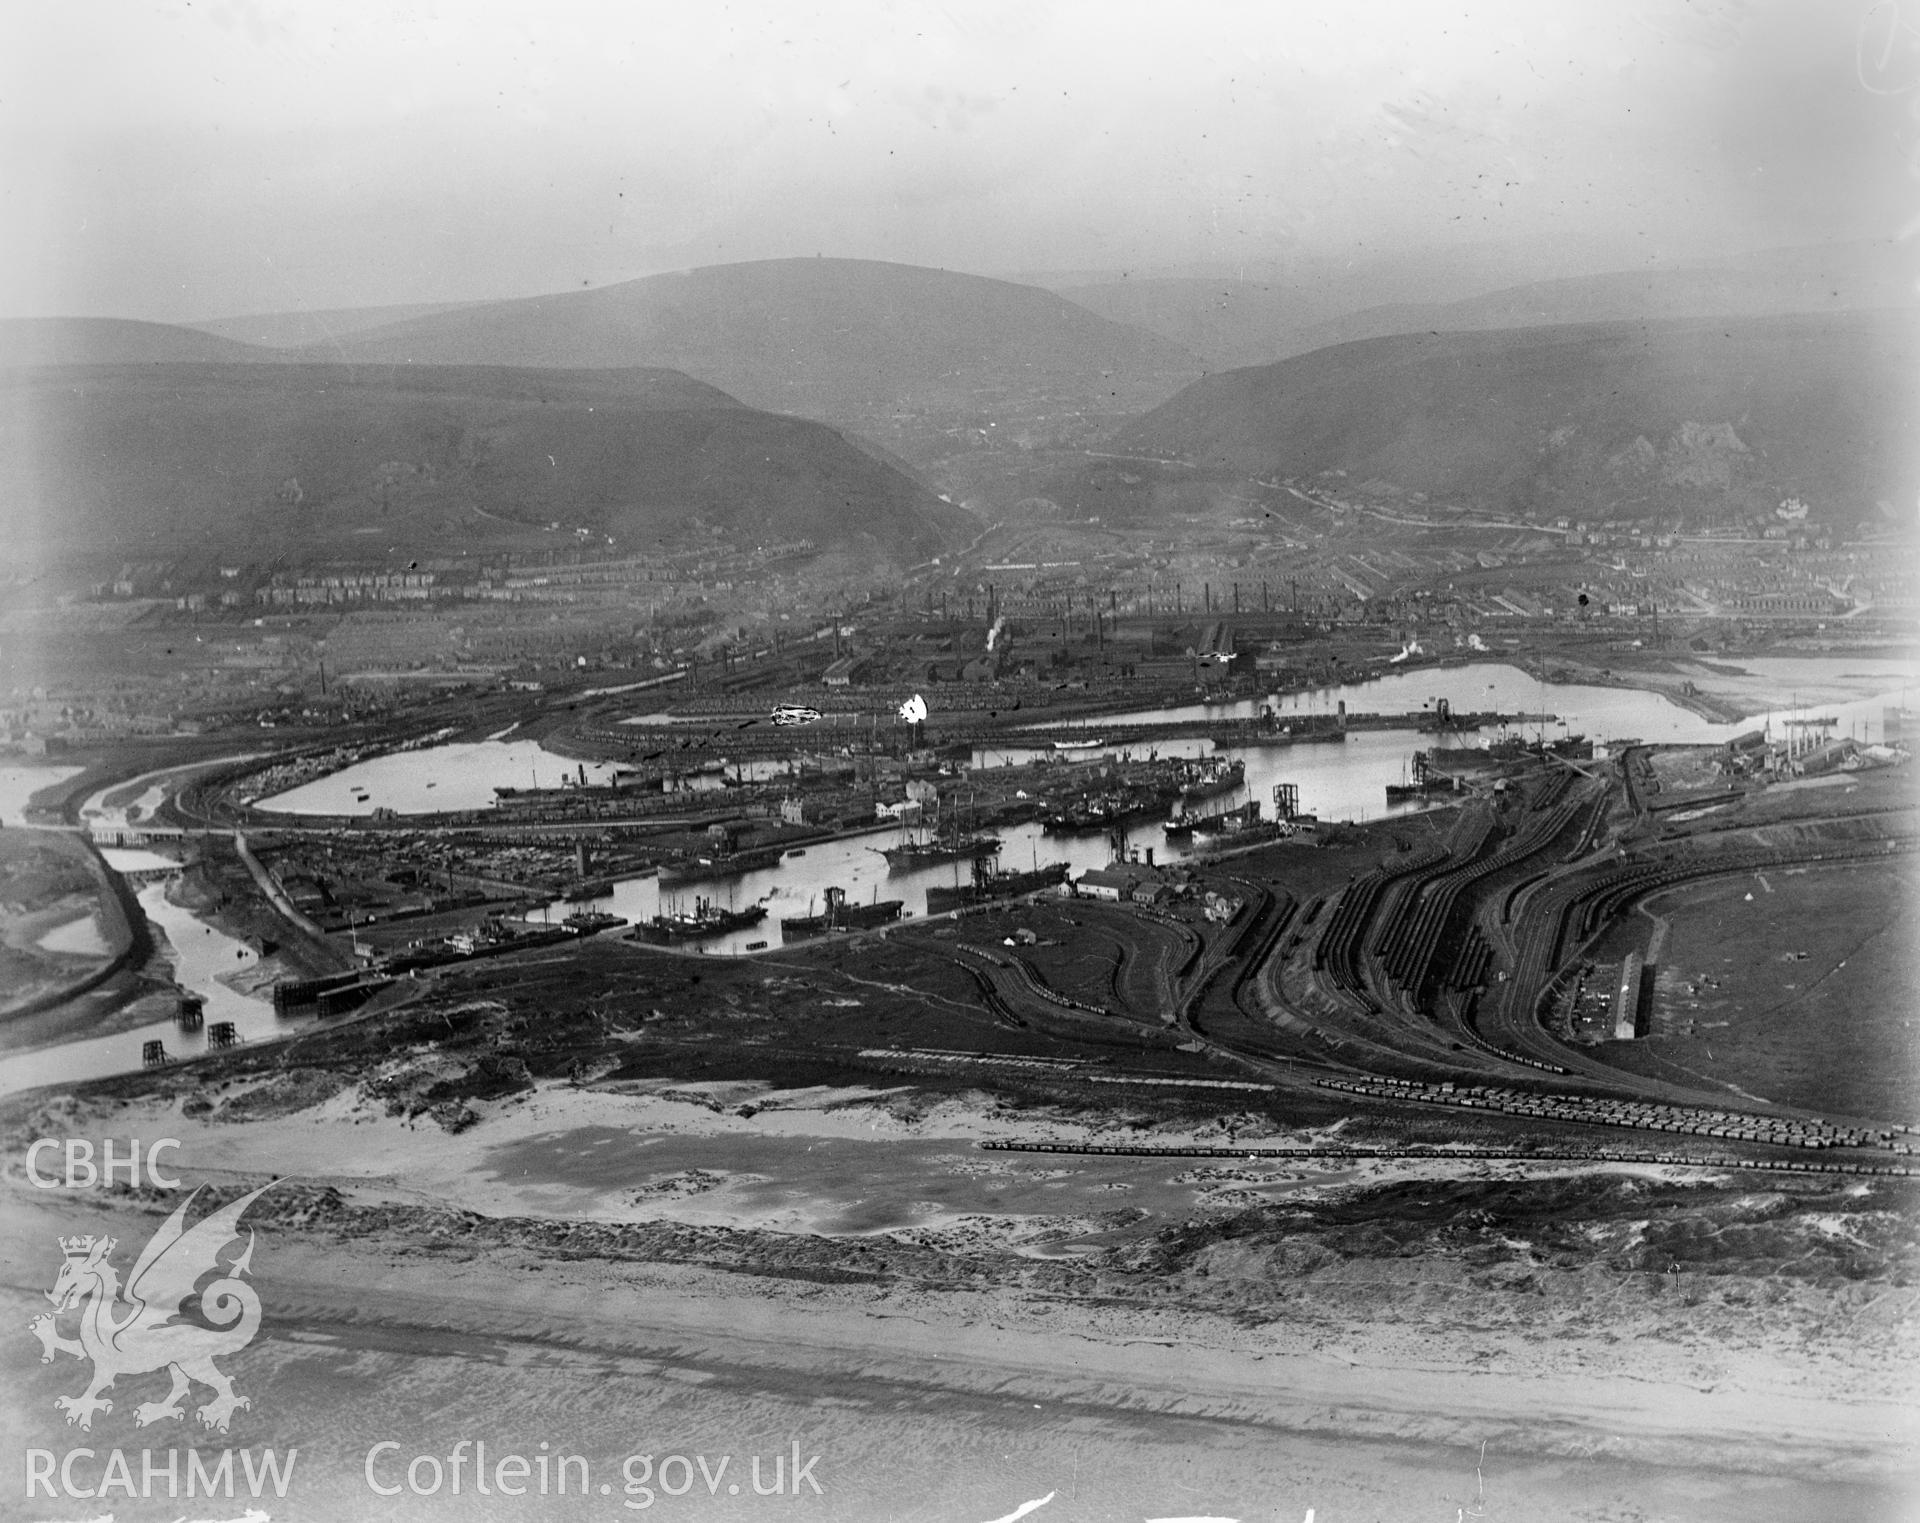 General view of Port Talbot showing docks, oblique aerial view. 5?x4? black and white glass plate negative.